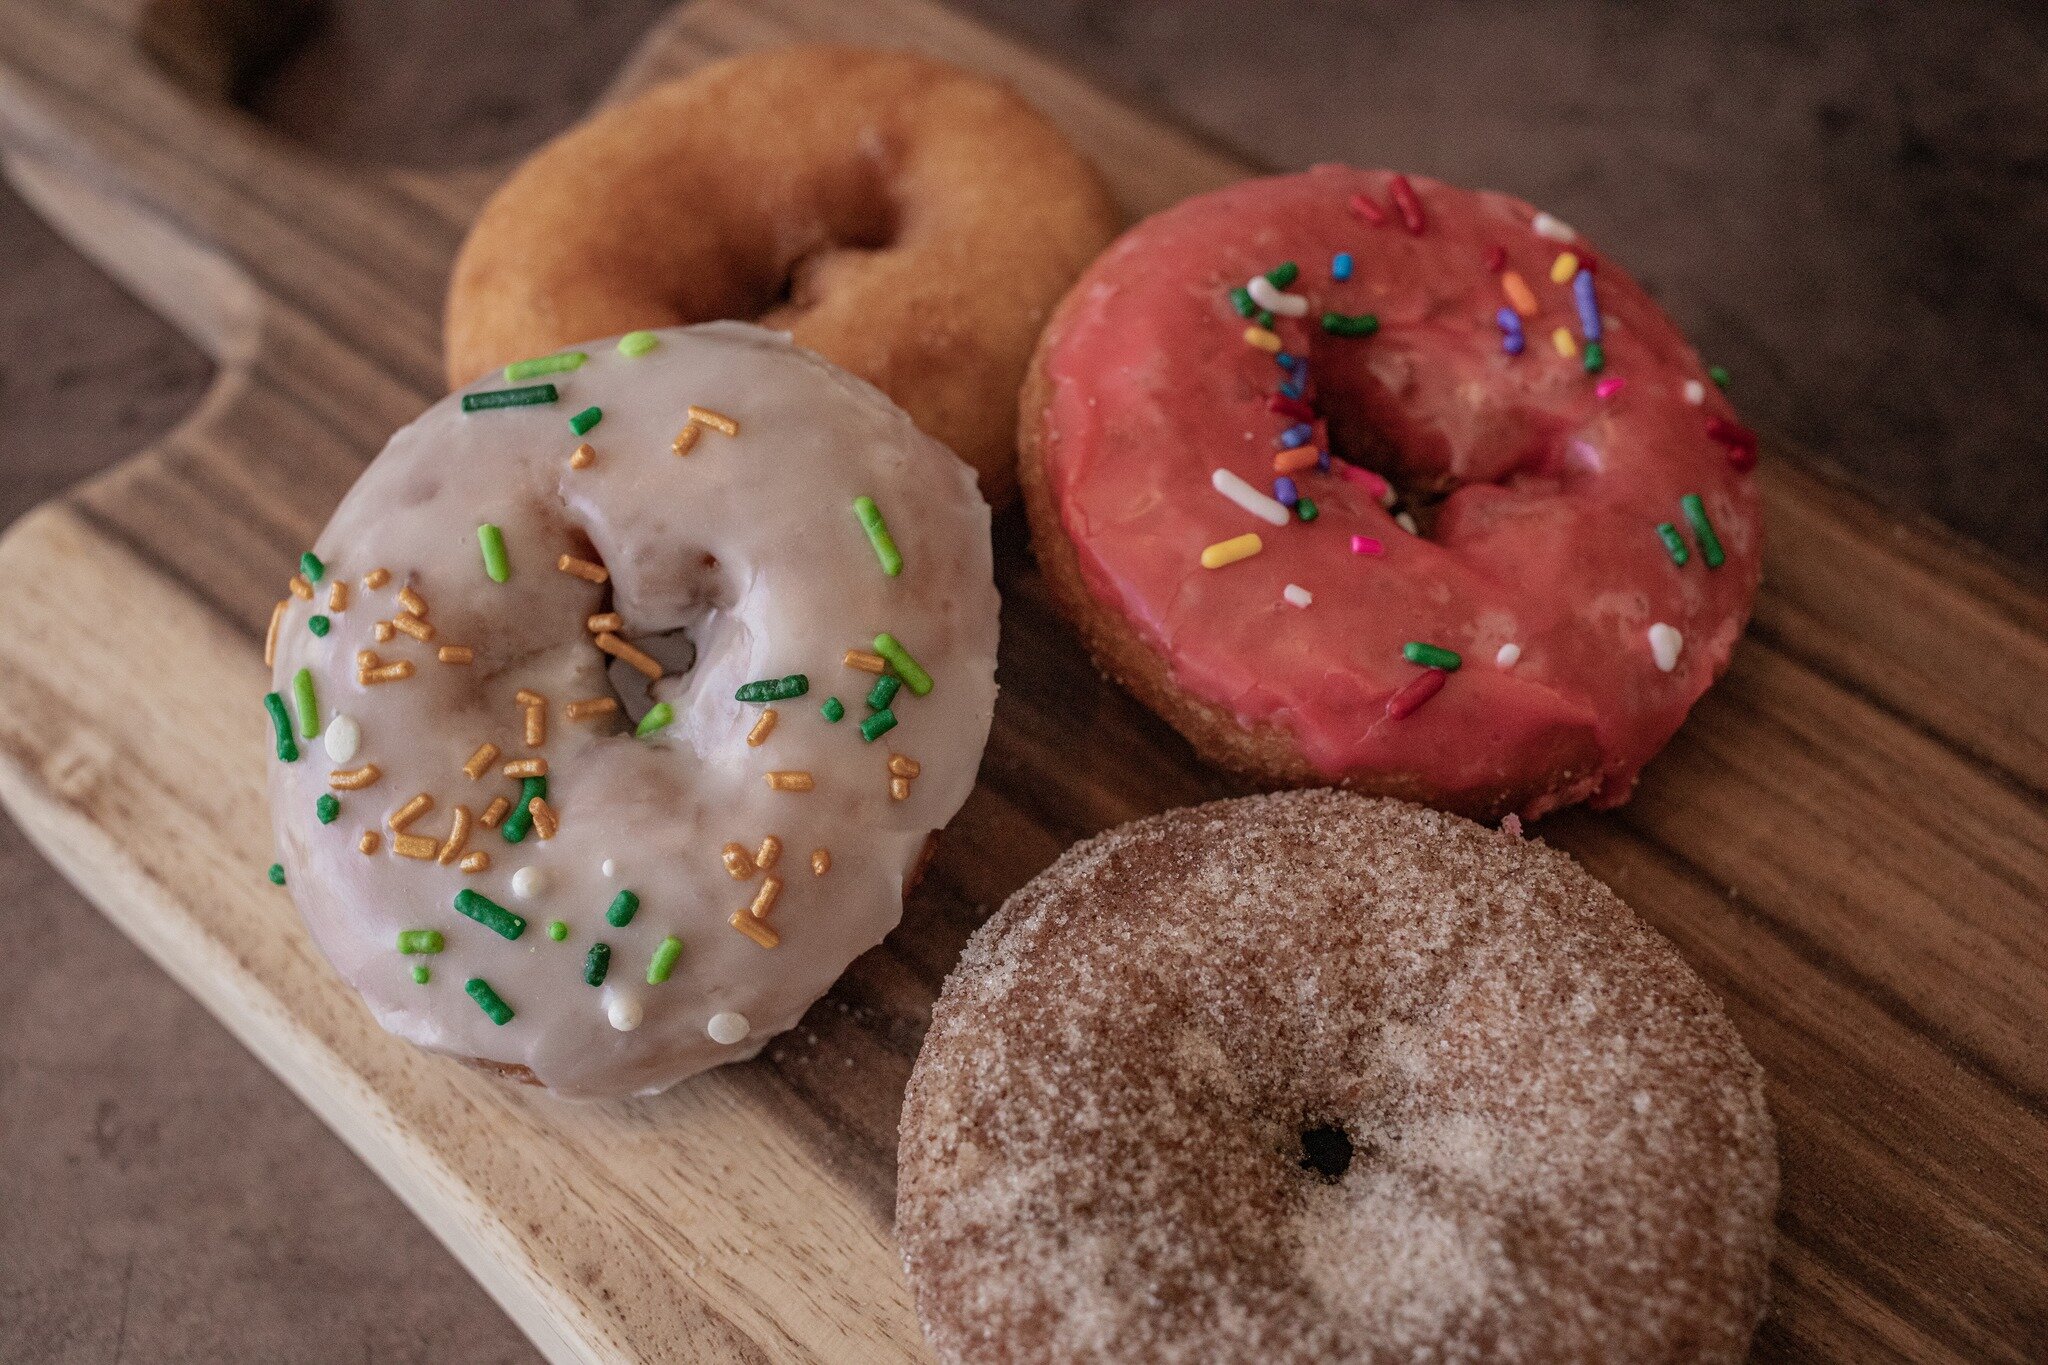 The weekend is almost here. Start off your morning in a sweet way with our freshly made donuts and a cup of coffee. We have everything you need to get your day started in the best way possible!

Visit us at @bridgeportsuffolk for all of your bakery n